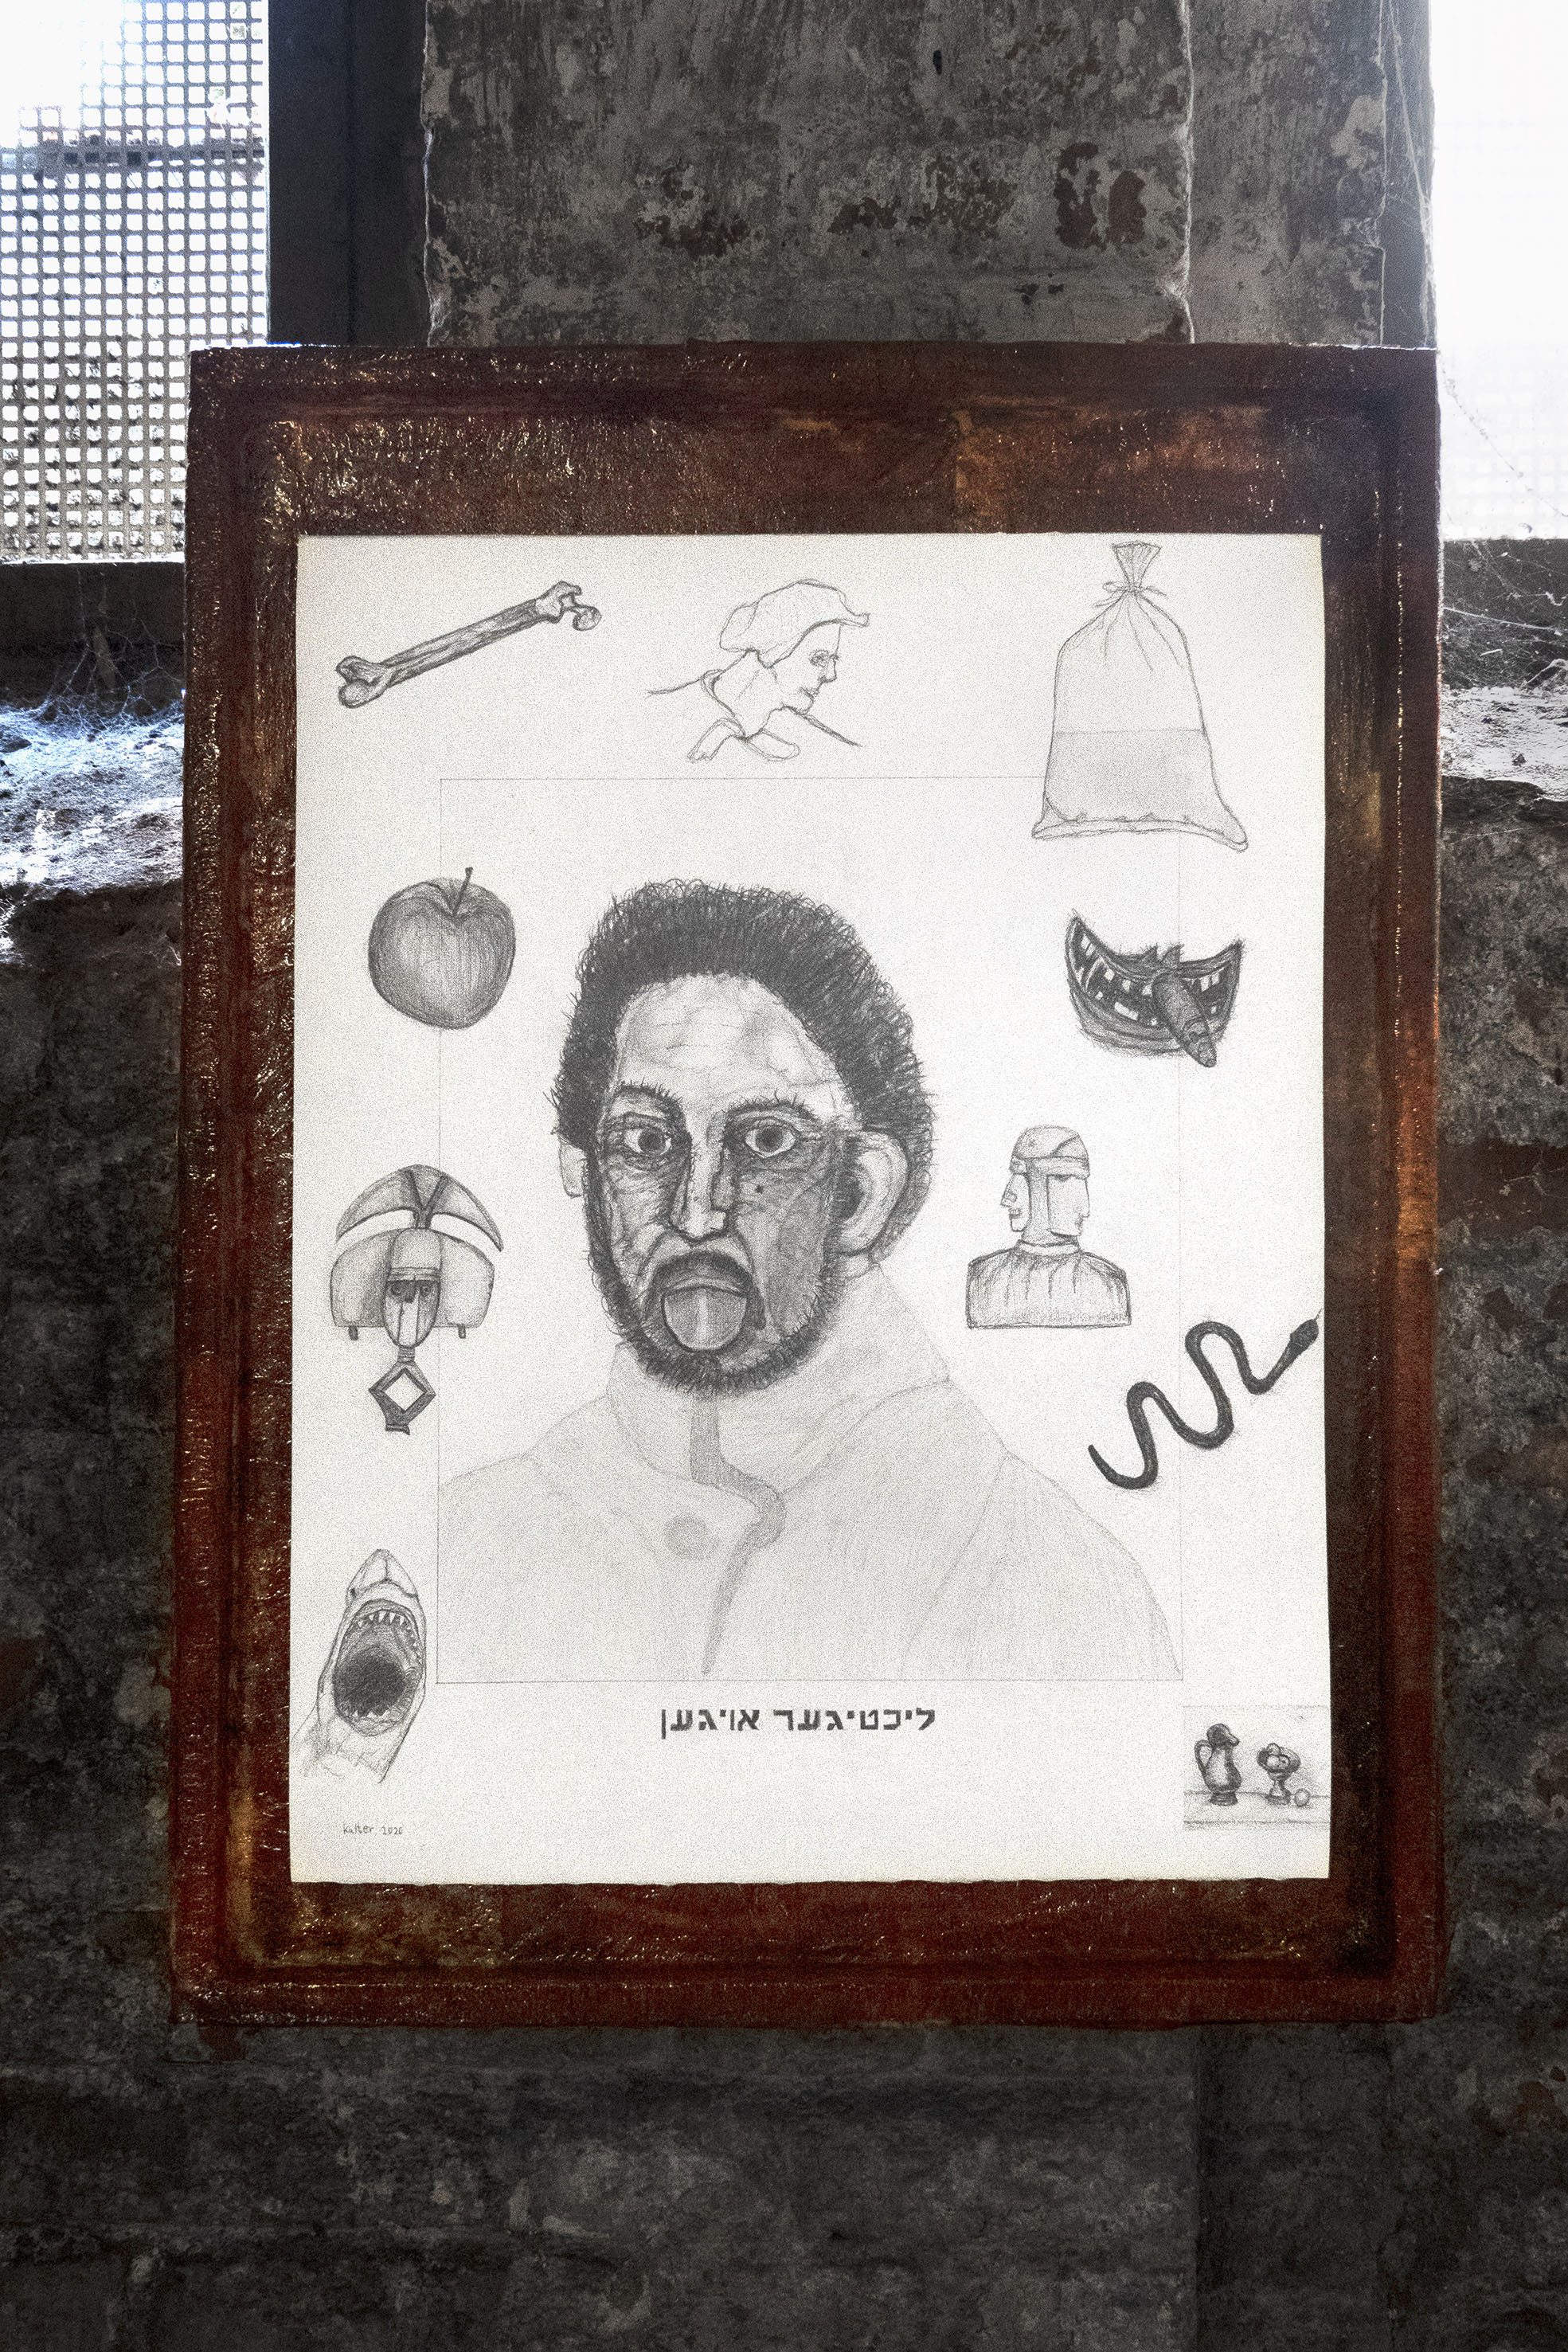 I. S. Kalter, "Bright Eyes", 2020â€“22. Pencil and graphite on paper, artist frame, 65x50 cm (with frame, 80x60x4 cm)